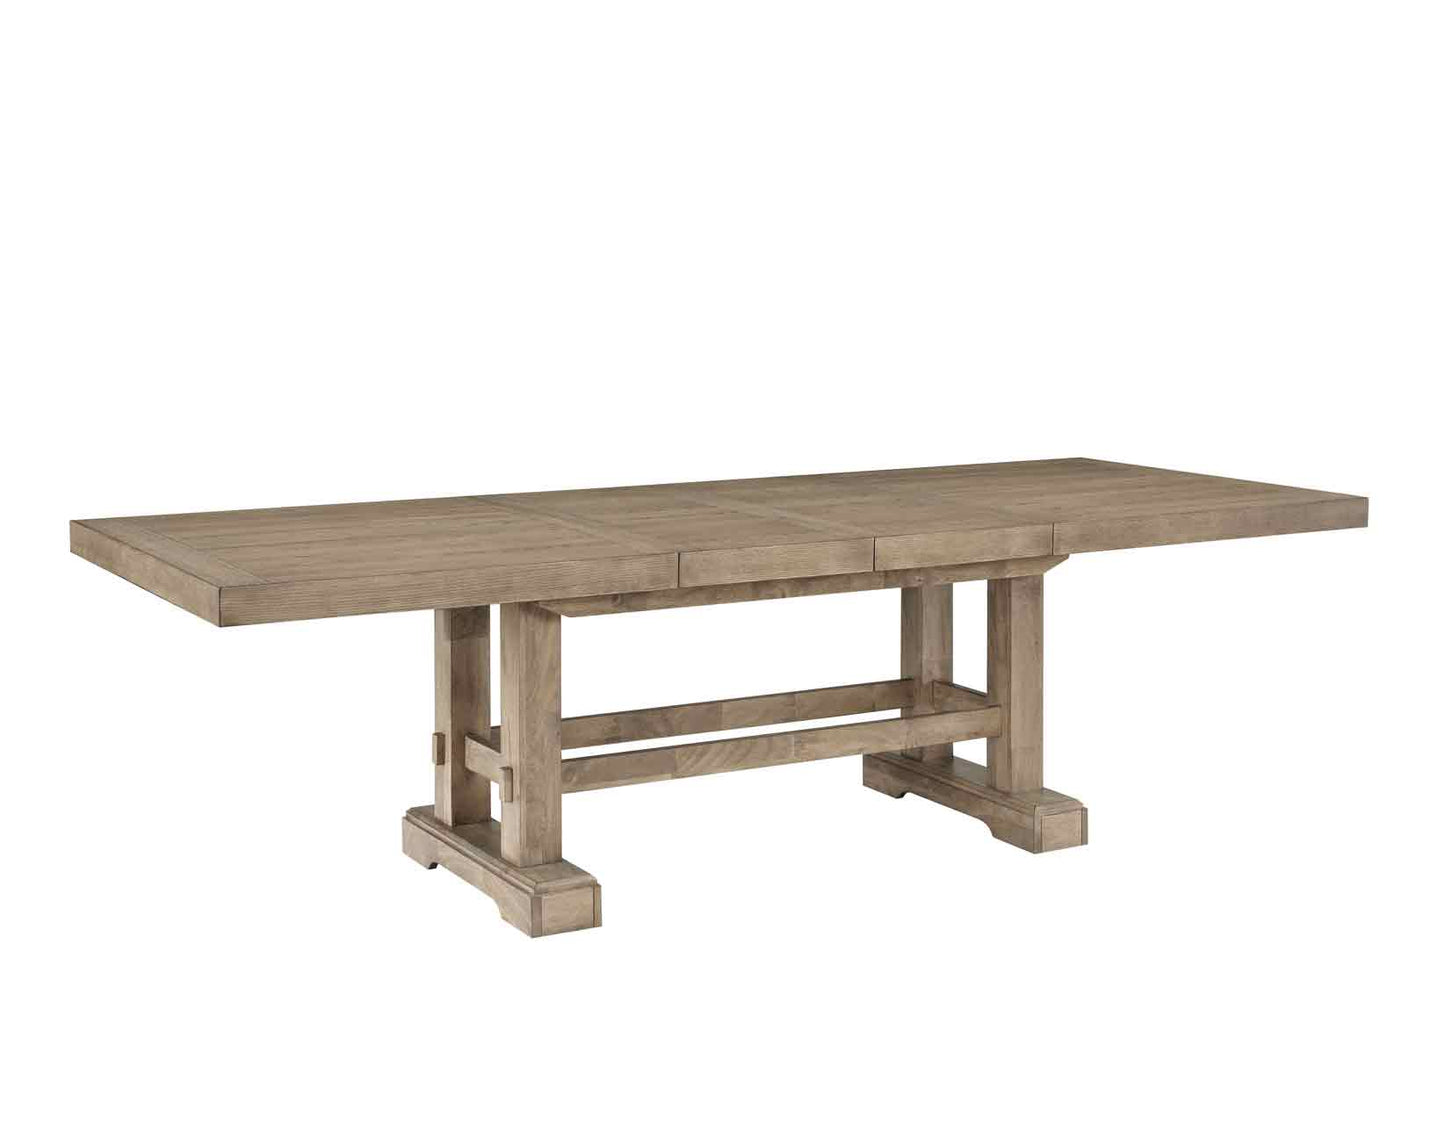 Napa 108-inch Dining Table with 2/18-inch Leaves, Sand